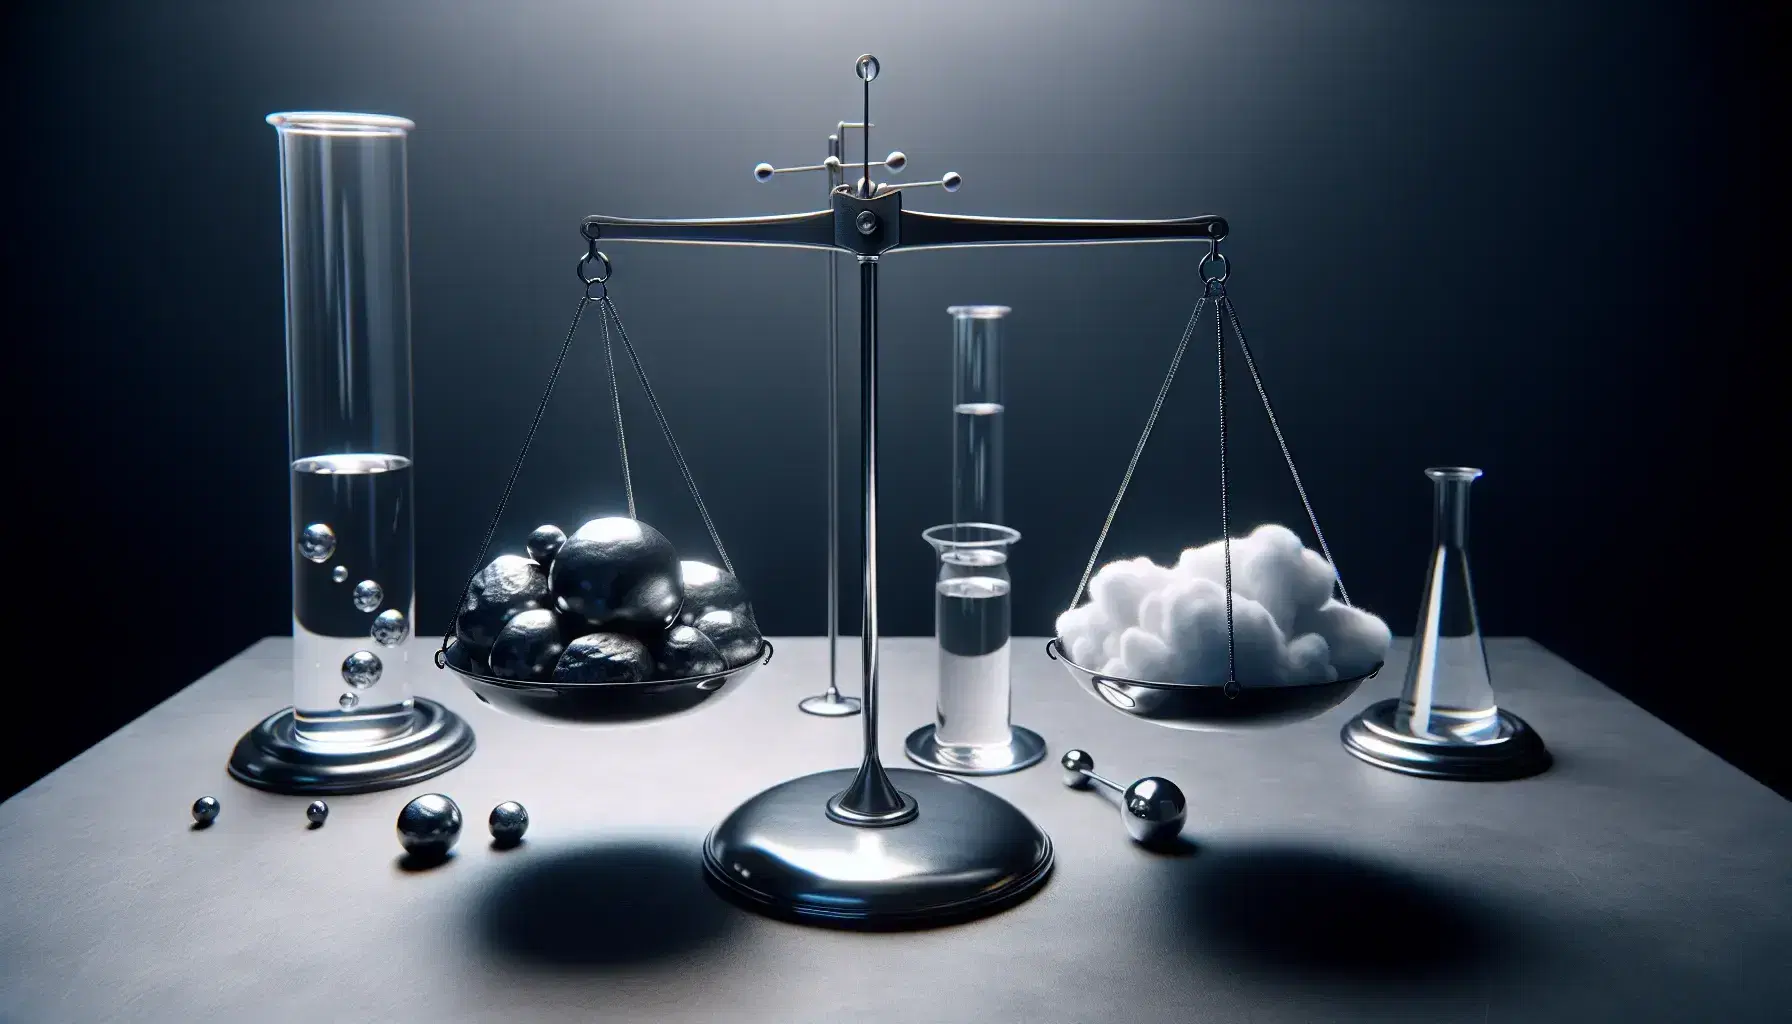 Classic physics balance scale at equilibrium with stones on one pan and cotton balls on the other, a beaker with liquid and a reflective sphere nearby.